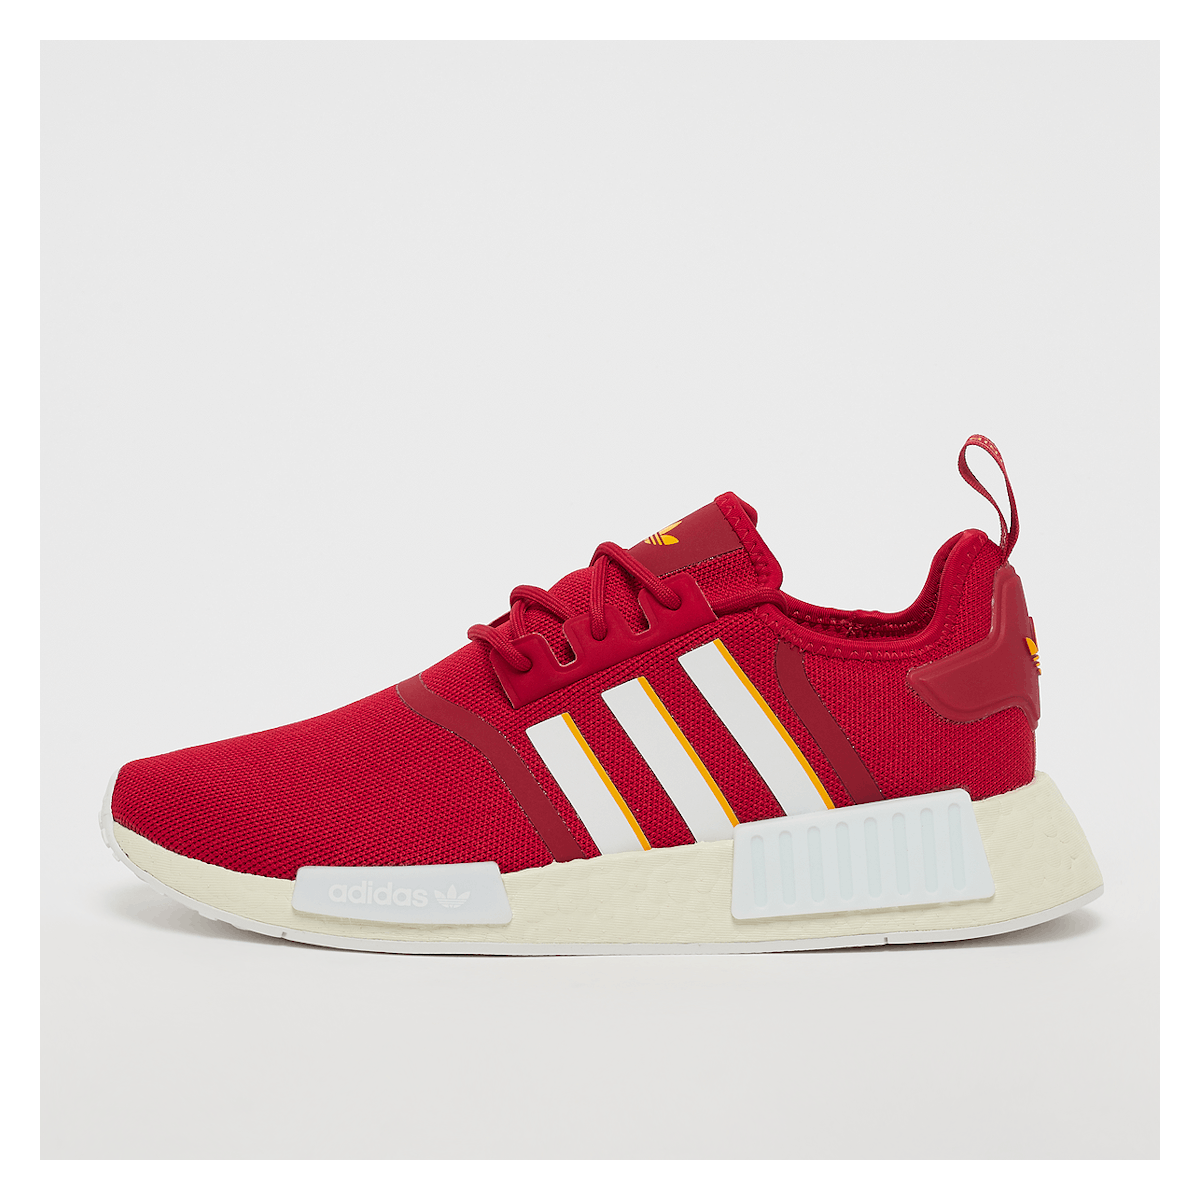 adidas NMD R1 "Power Red Yellow"